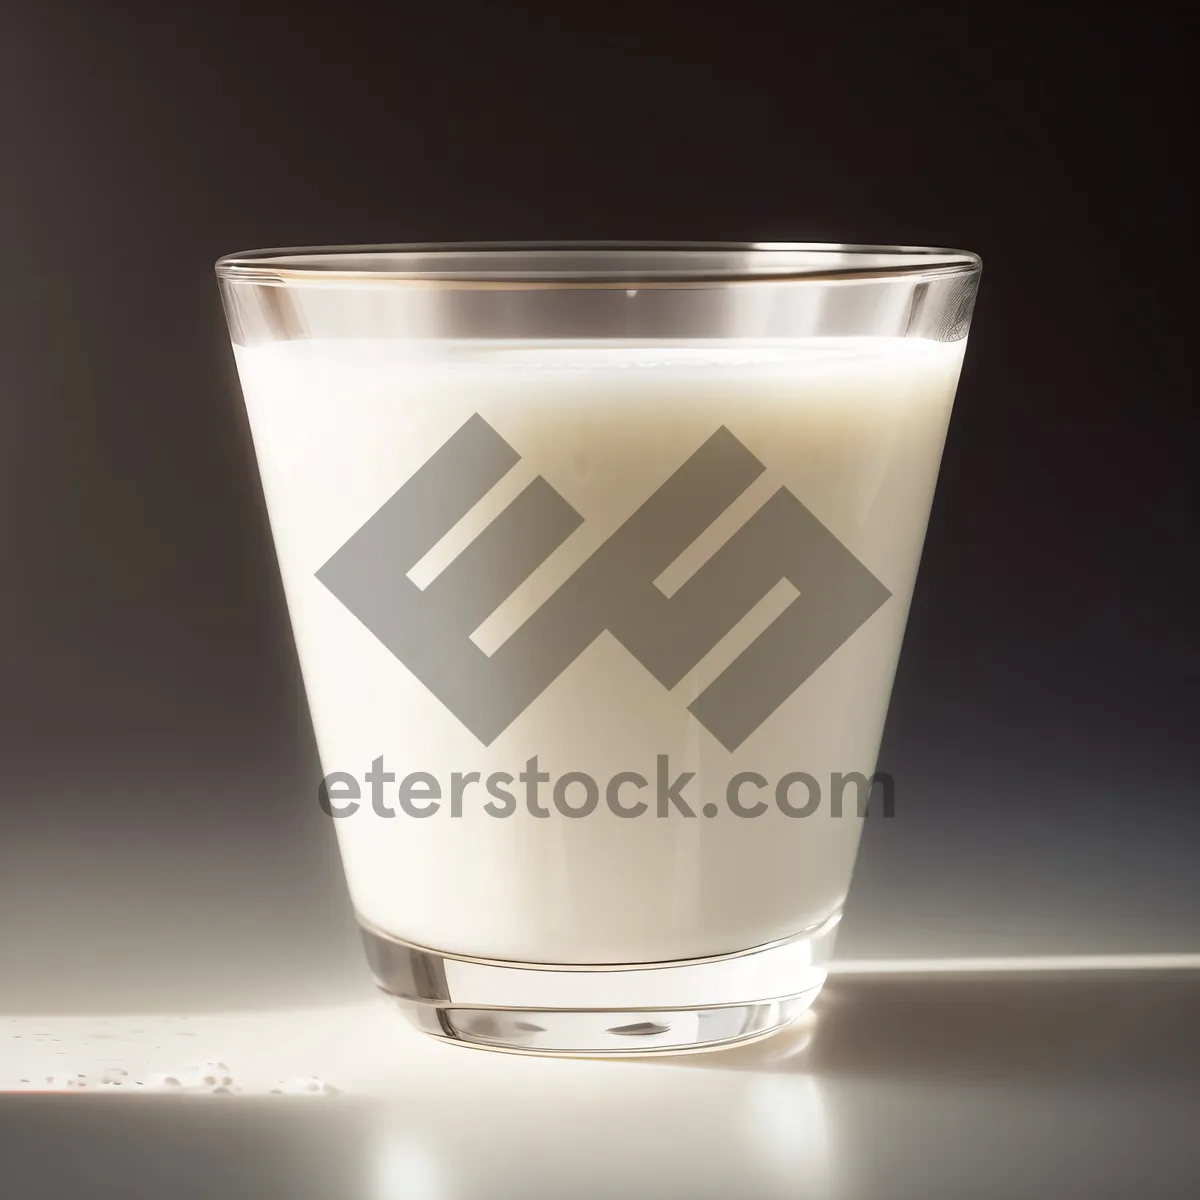 Picture of Refreshing Milk in Glass